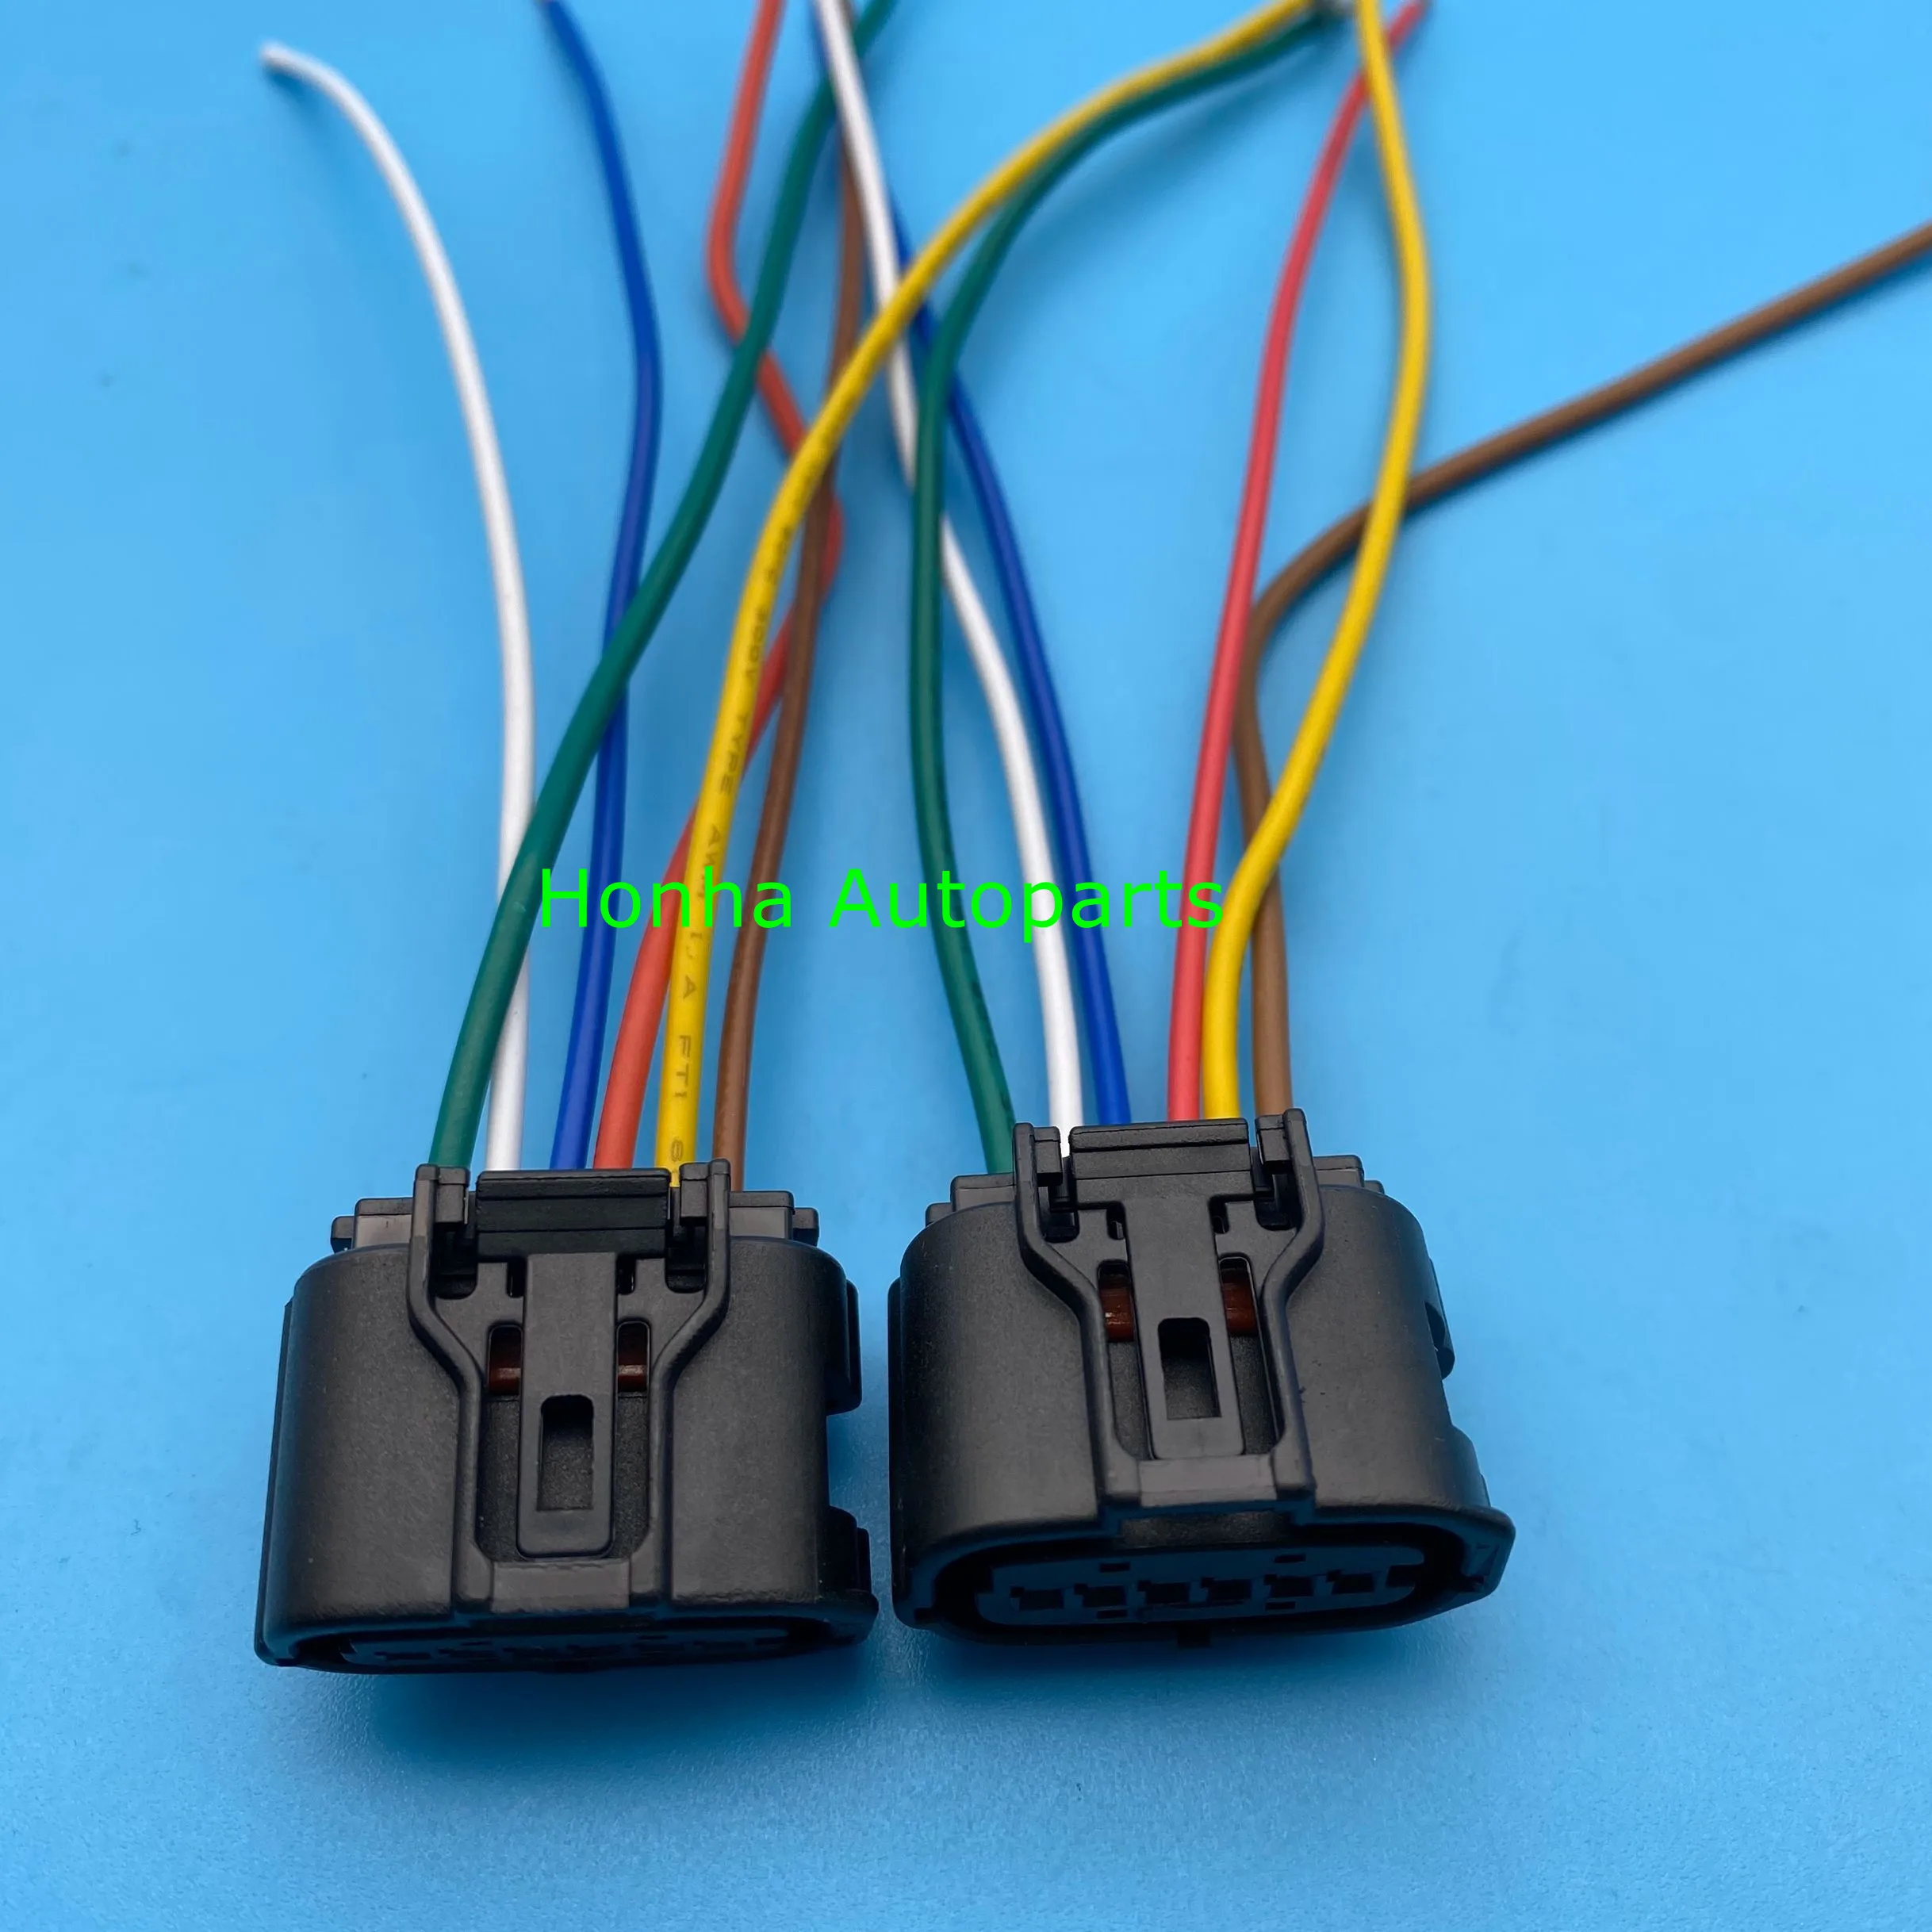 

Free shipping 20 pcs 6 Pin 6189-1083 Sumitomo Auto Accelerator Pedal 6 pin Female Connector with 15cm 20AWG wire